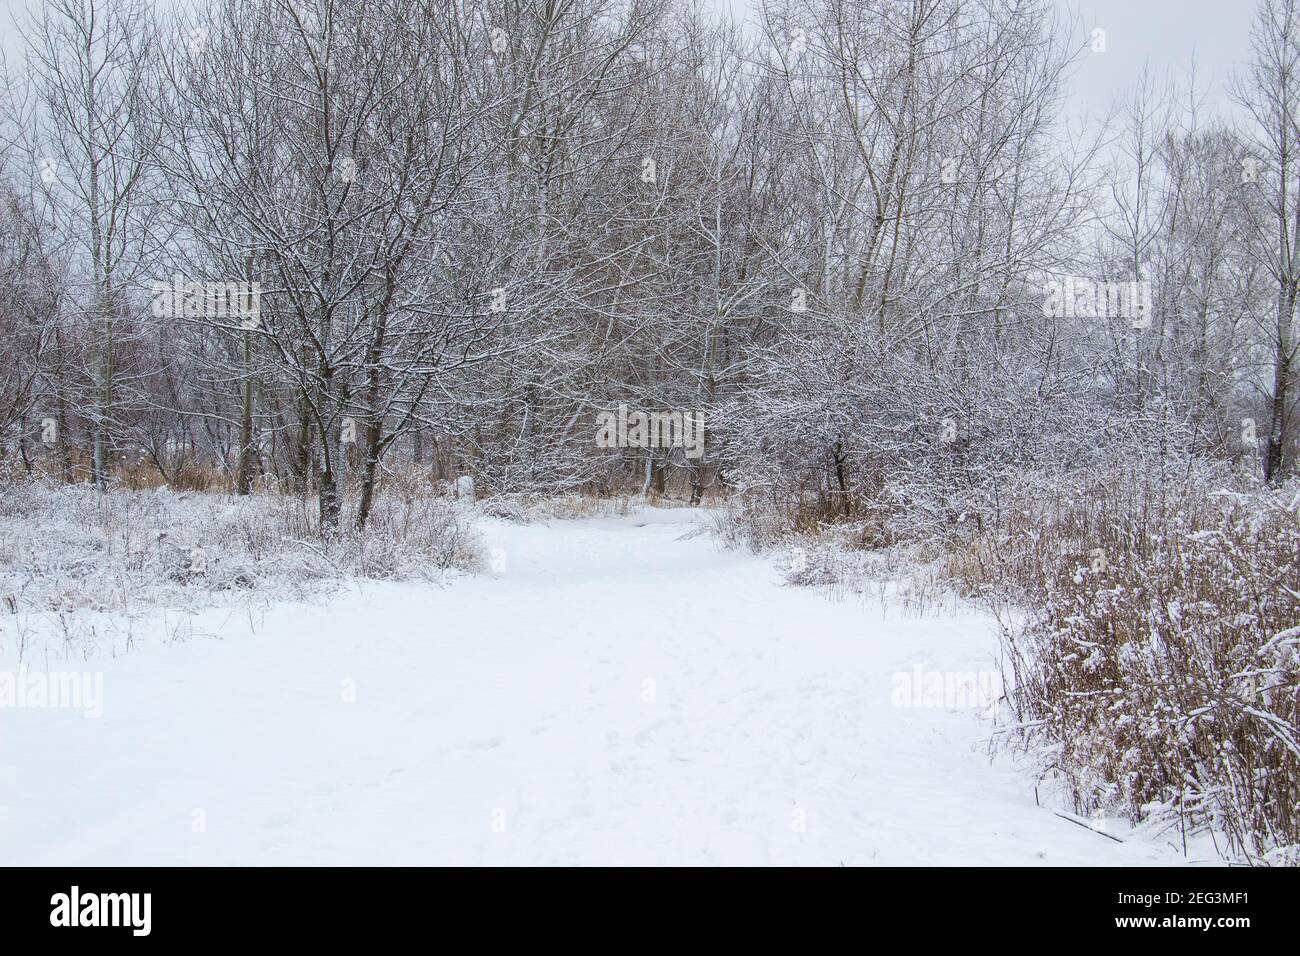 Beautiful winter background with trees and weeds frozen under the snow and frost.  Amazing snowy landscape Stock Photo